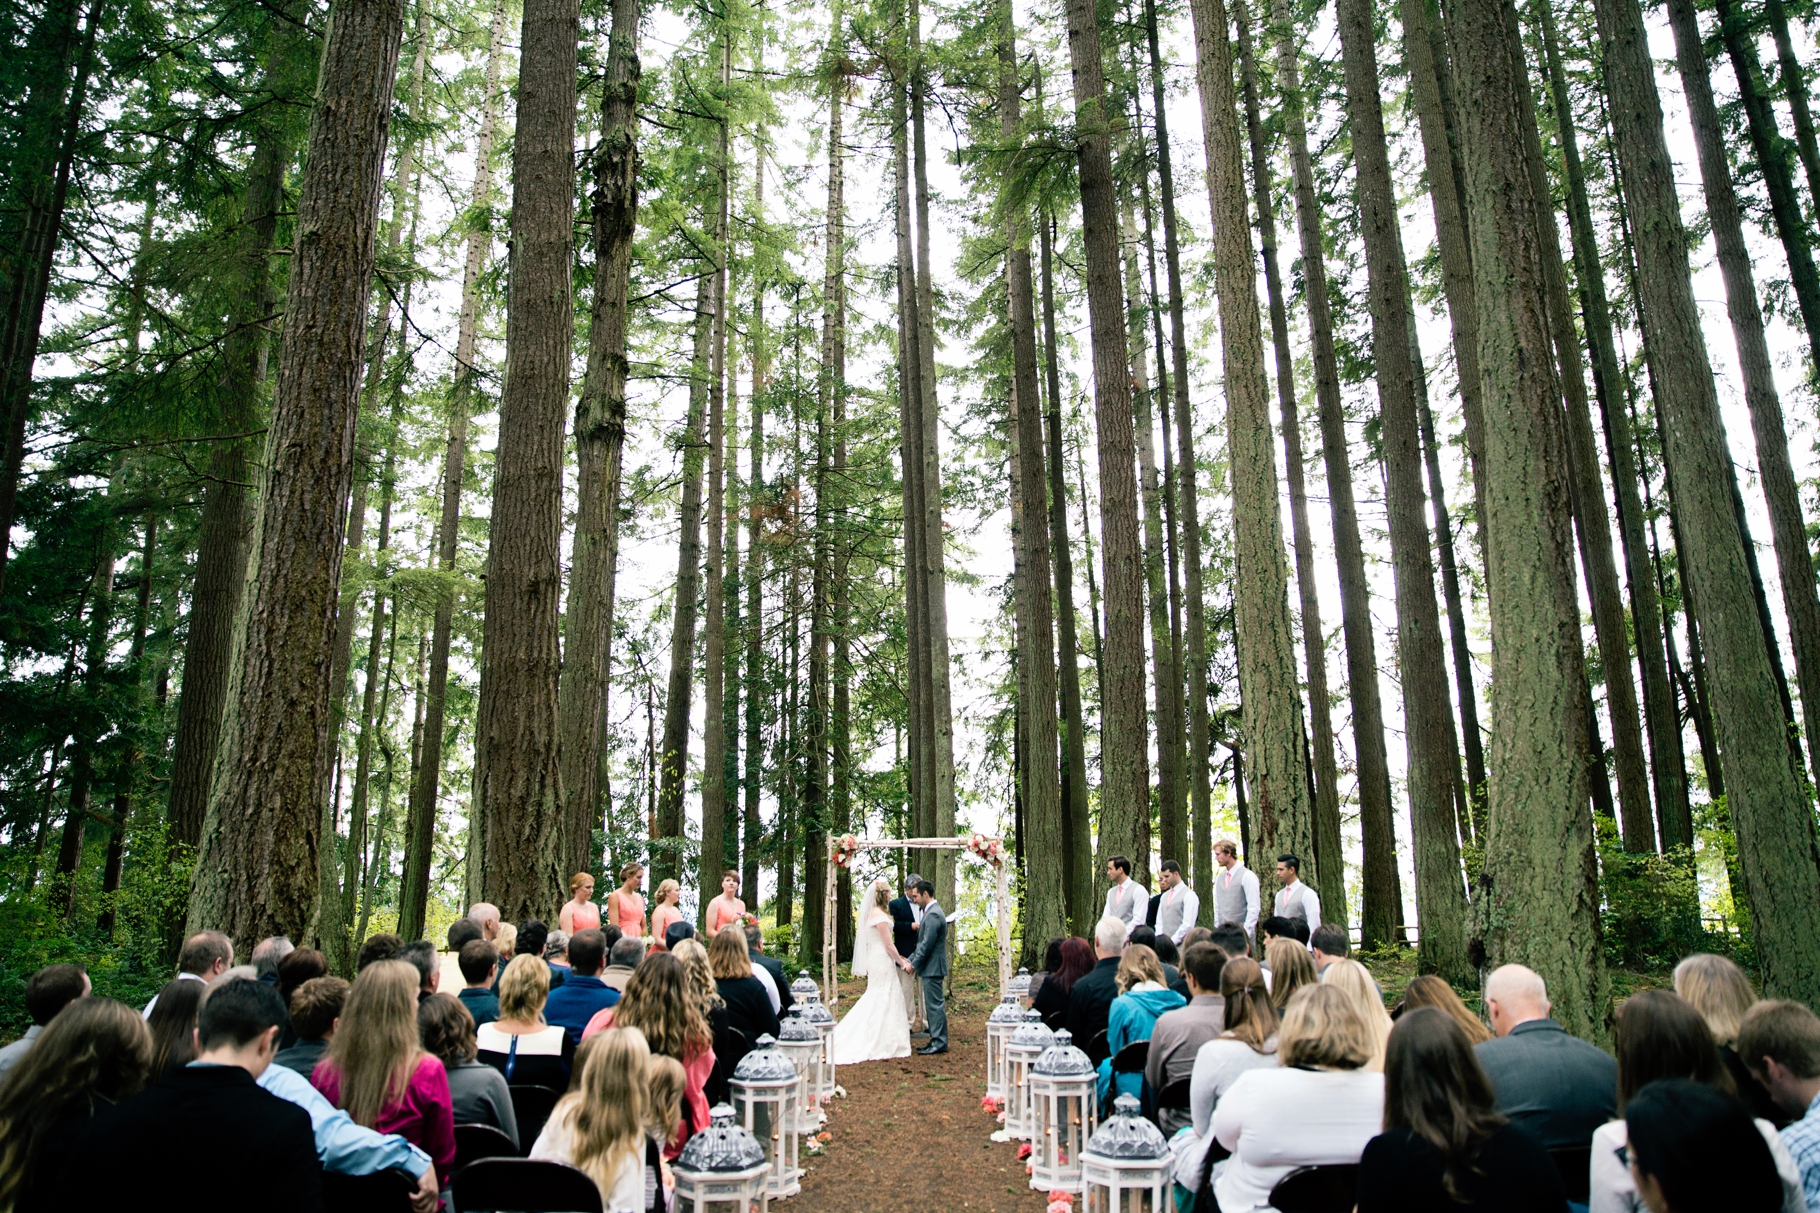 37-Ceremony-Bride-Groom-Vows-wooded-bluff-olympic-mountains-Kitsap-Memorial-State-Park-Forest-Northwest-Photographer-Seattle-Wedding-Photography-by-Betty-Elaine